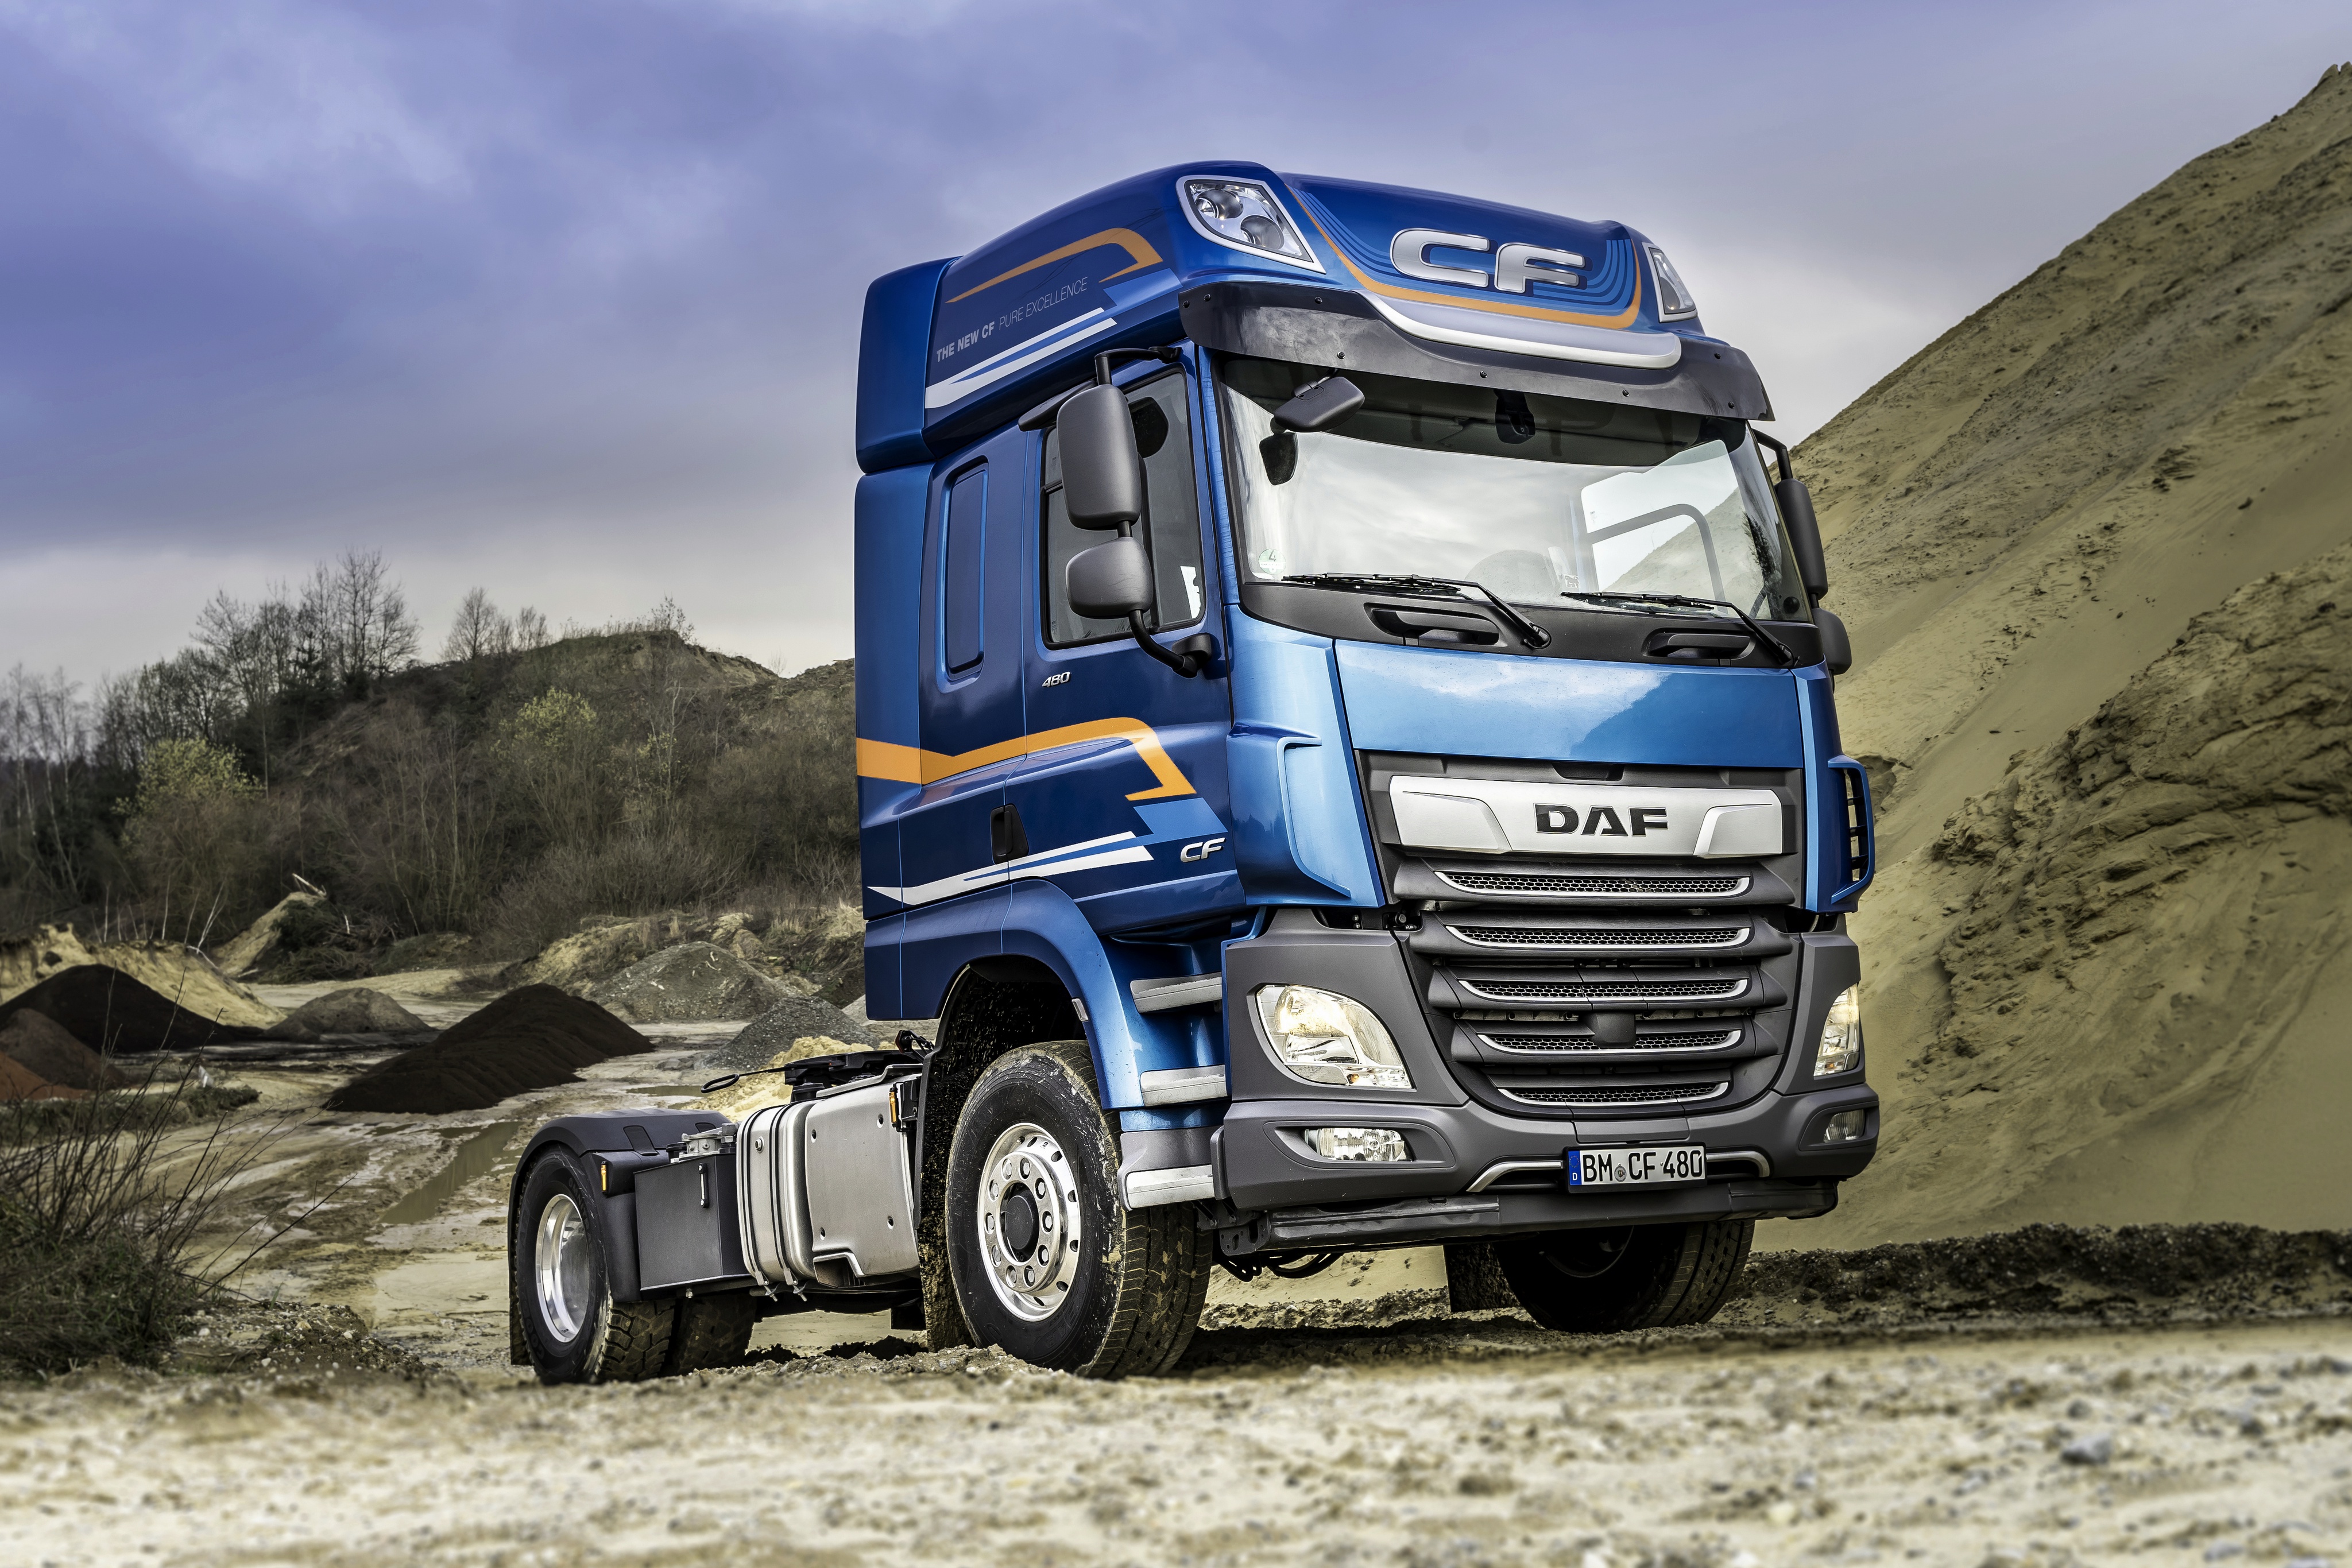 Download Daf wallpapers for mobile phone, free Daf HD pictures